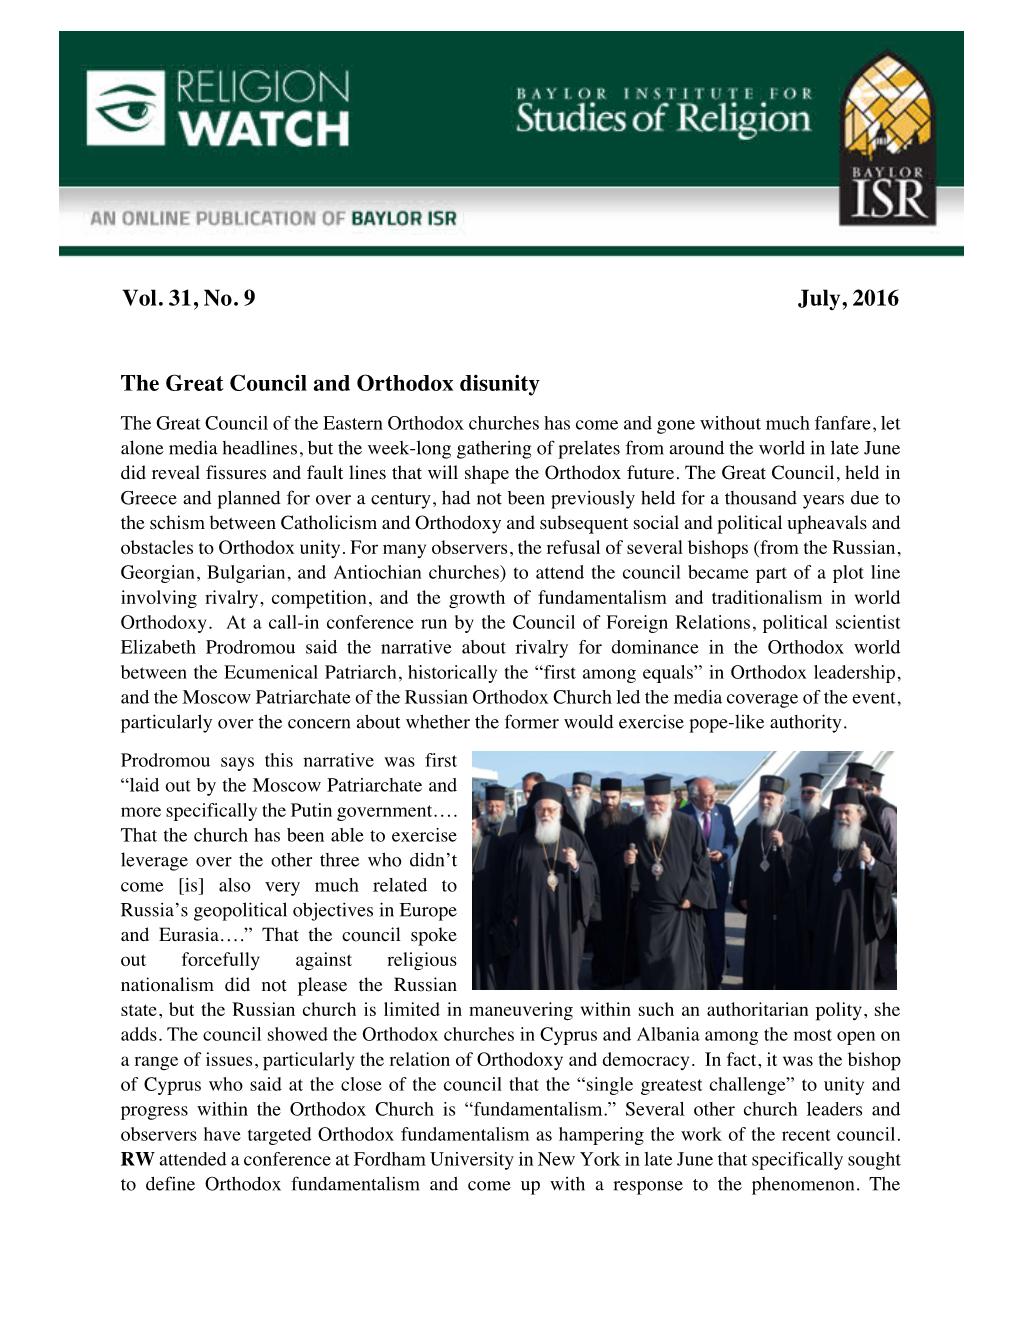 Vol. 31, No. 9 July, 2016 the Great Council and Orthodox Disunity